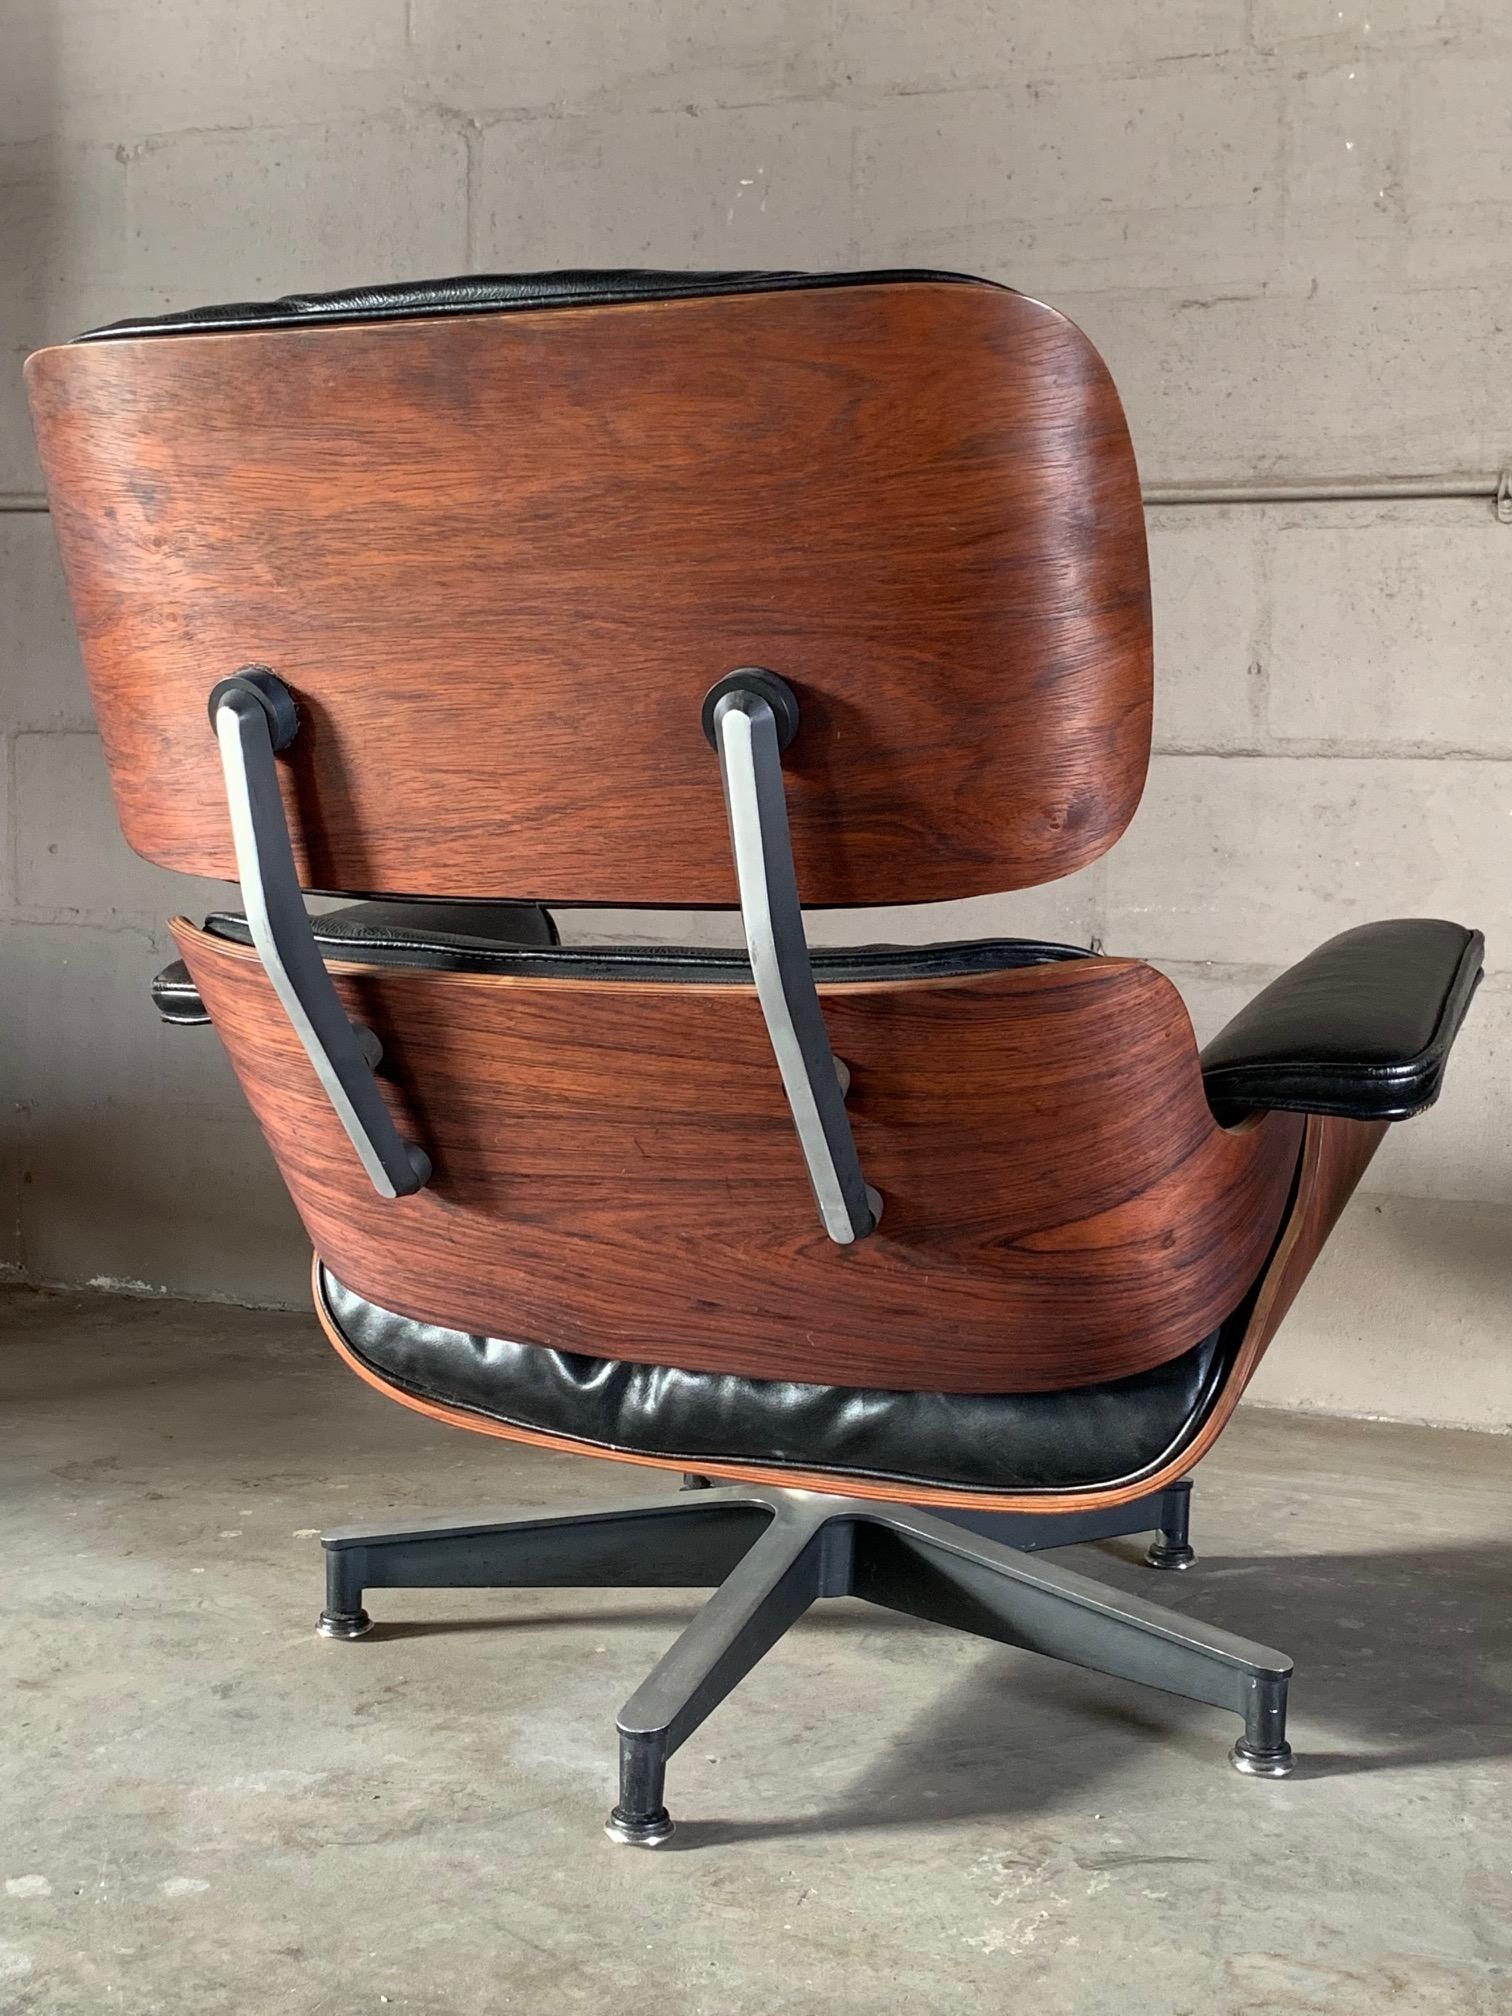 American Charles Eames Herman Miller Lounge Chair and Ottoman 1956